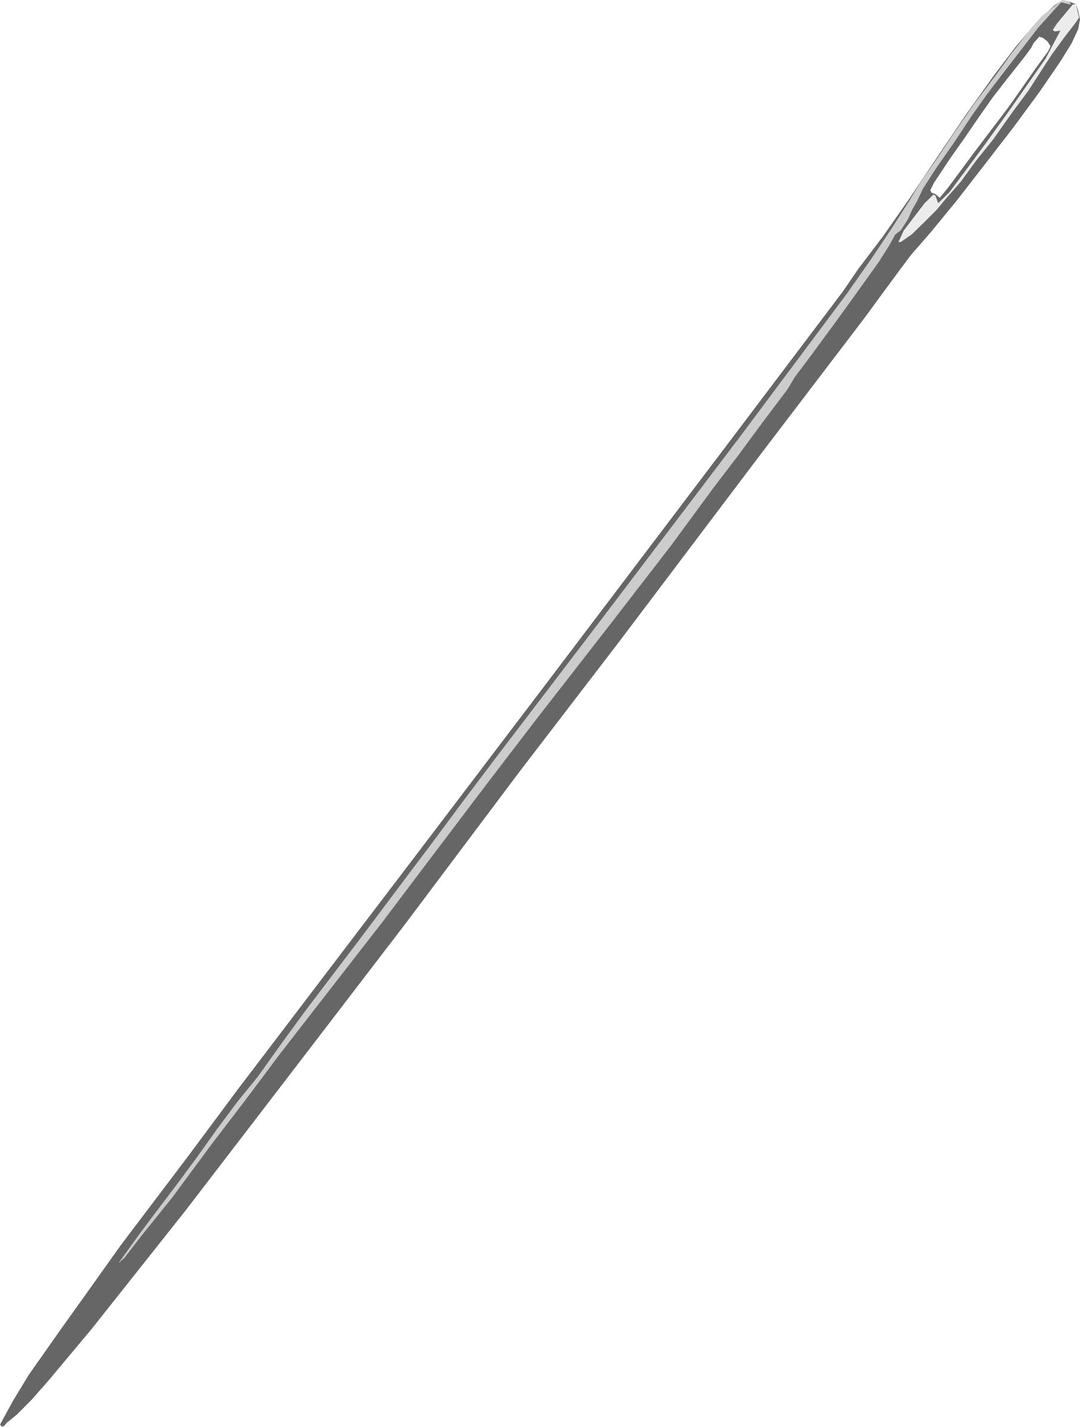 Sewing needle png transparent